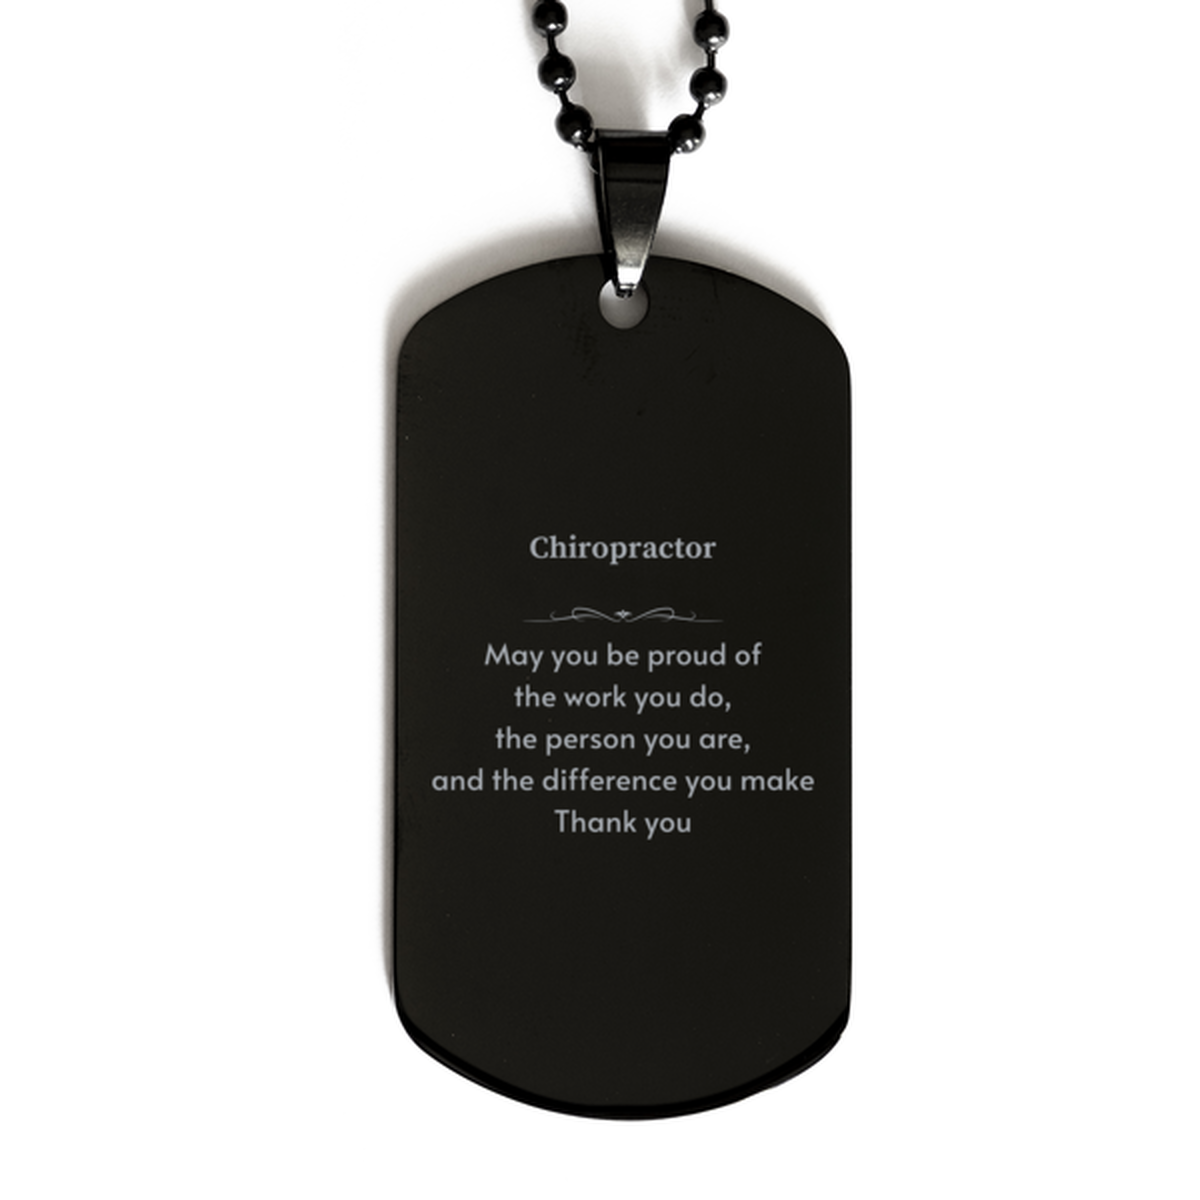 Heartwarming Black Dog Tag Retirement Coworkers Gifts for Chiropractor, Chiropractor May You be proud of the work you do, the person you are Gifts for Boss Men Women Friends